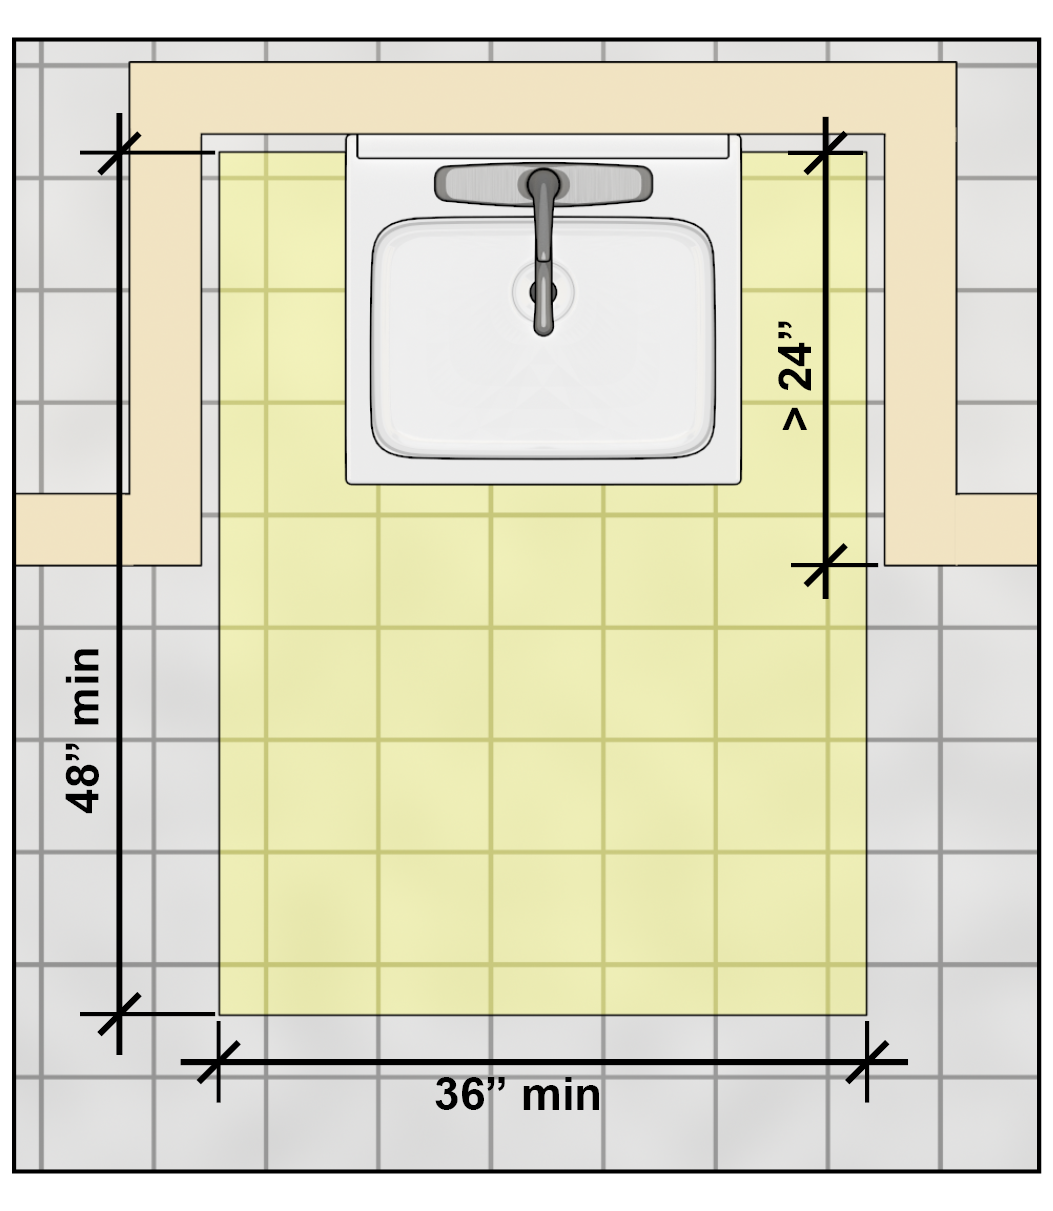 Plan view of larger highlighted clear floor space underlying recessed lavatory in alcove.  Clear floor space recessed more than 24 inches deep into an alcove must be 36 inches wide minimum and 48 inches deep minimum.